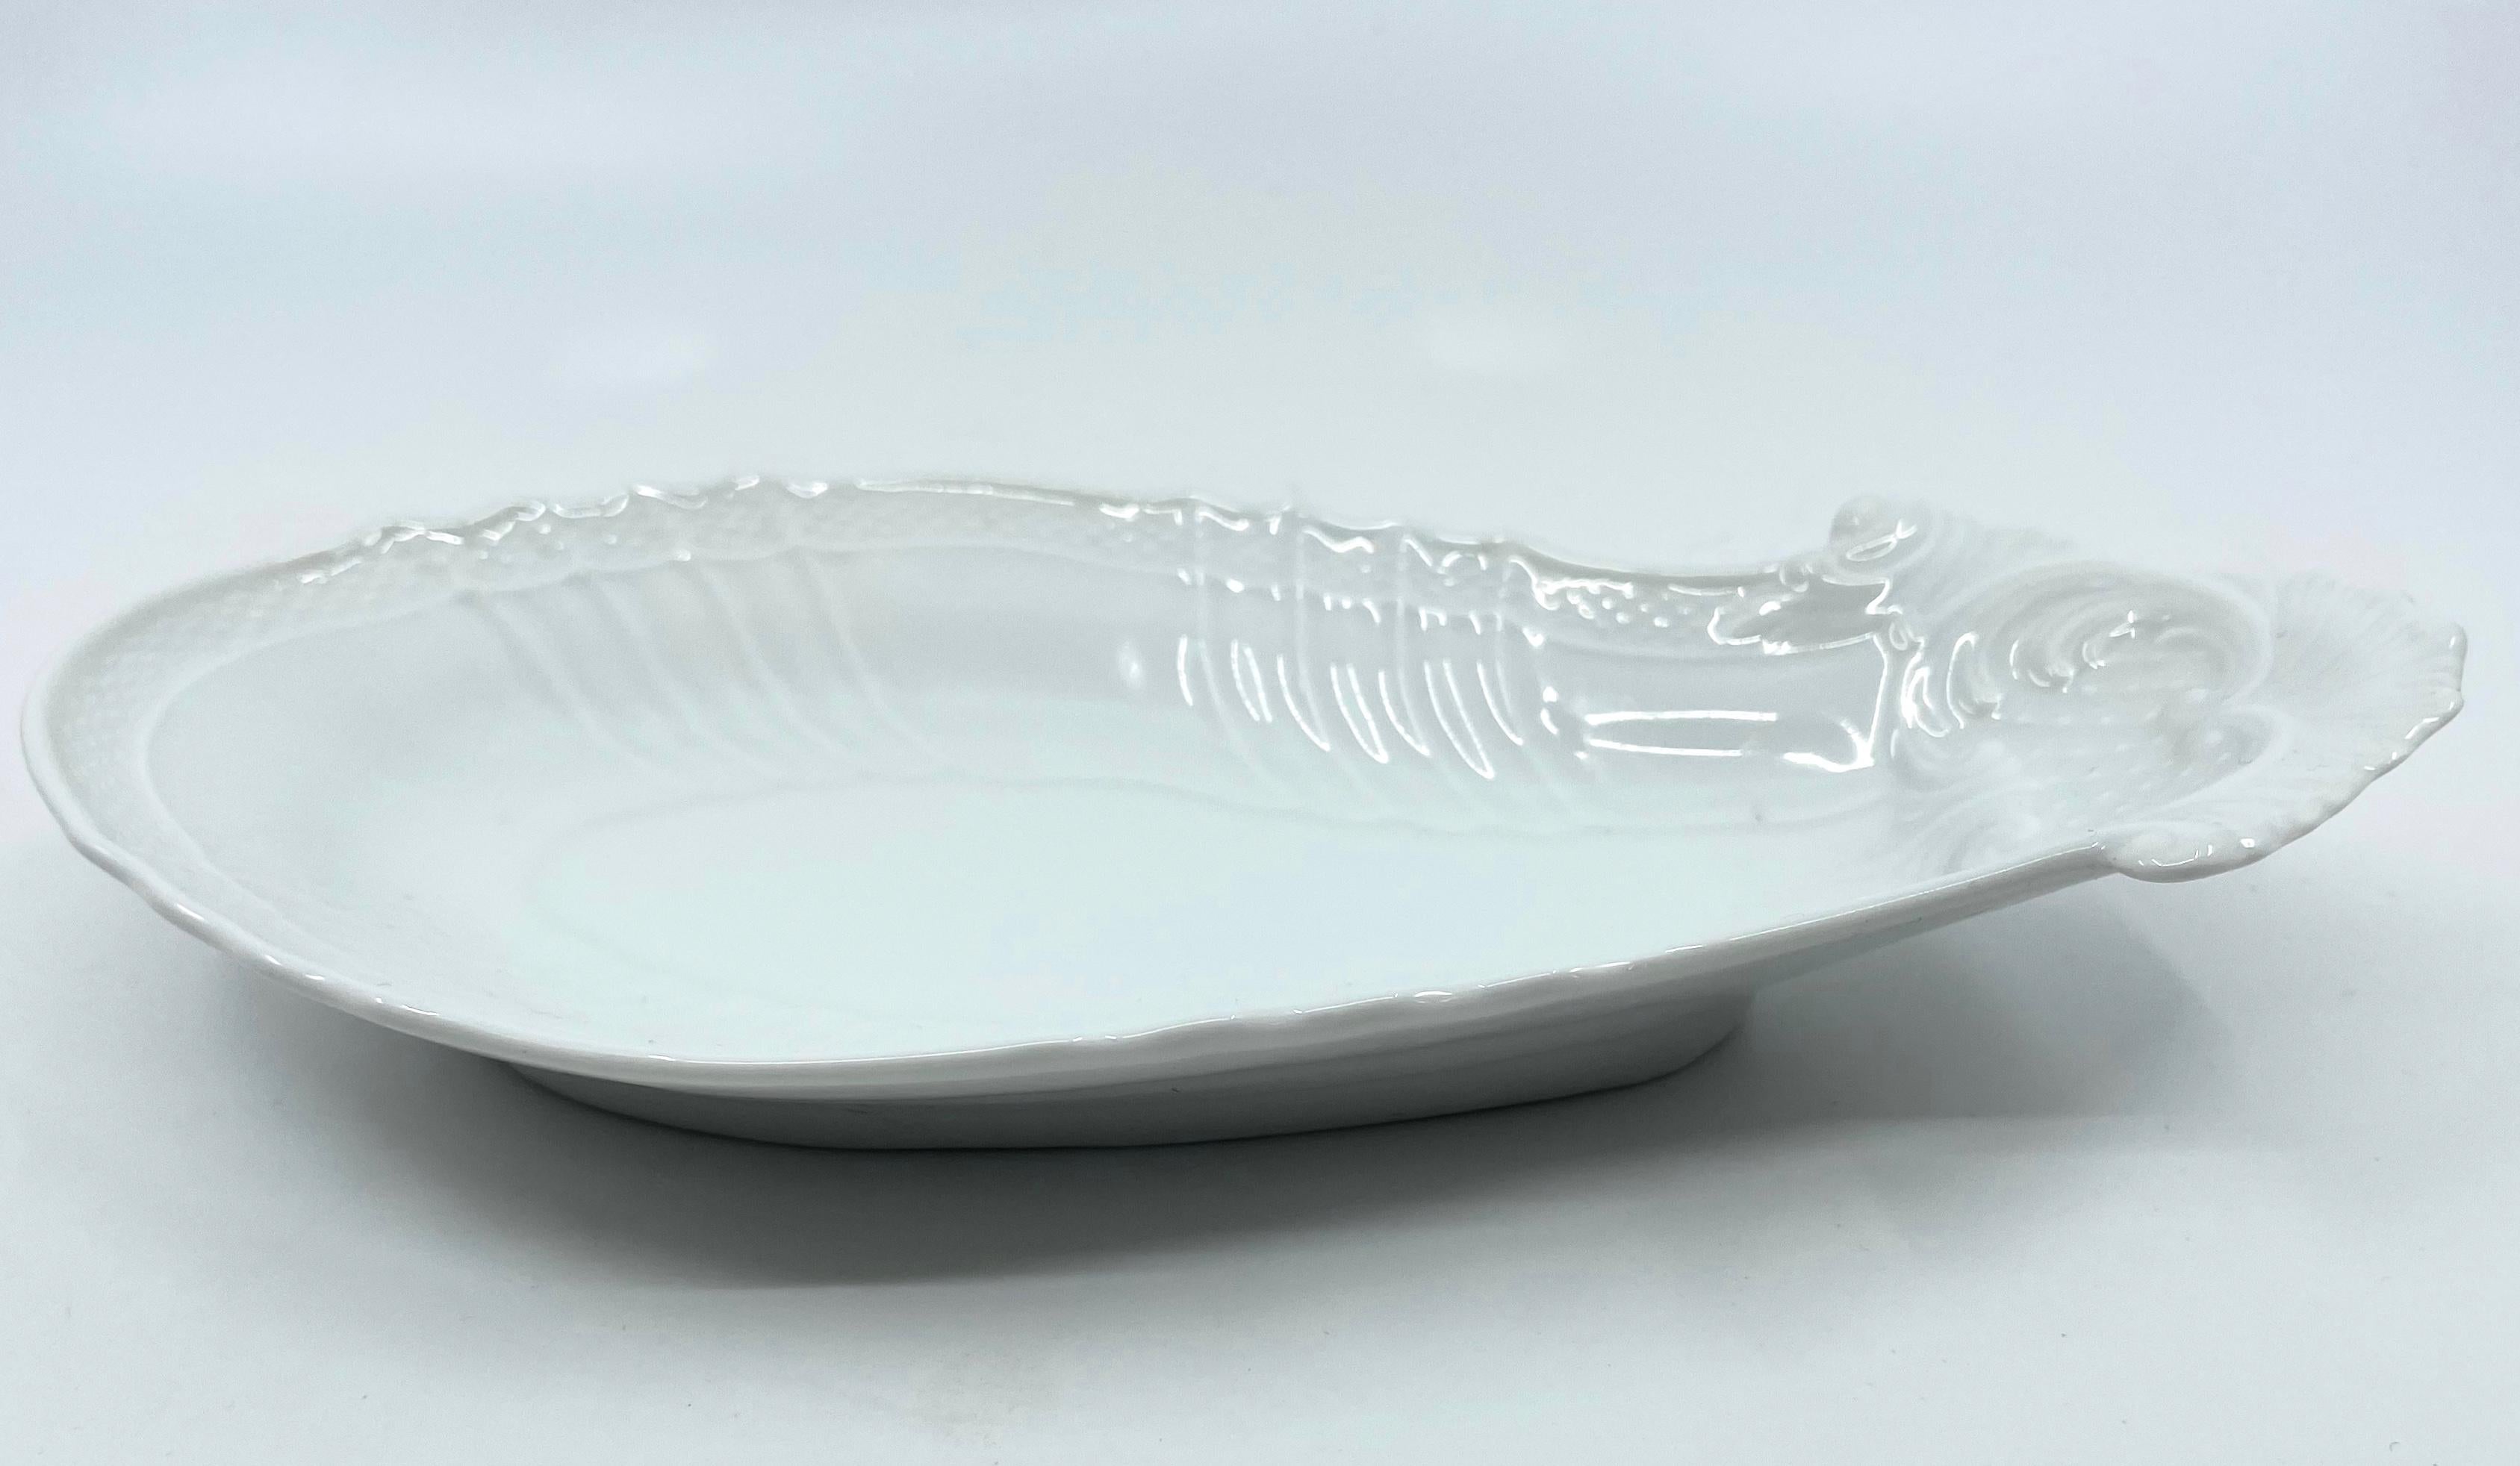 White shaped candy dish. Classic vintage Ginori Rococo paisley form shaped candy/serving dish. Italy mid-20th century. 
Dimensions: 9.5” W x 5” D x 2” H.